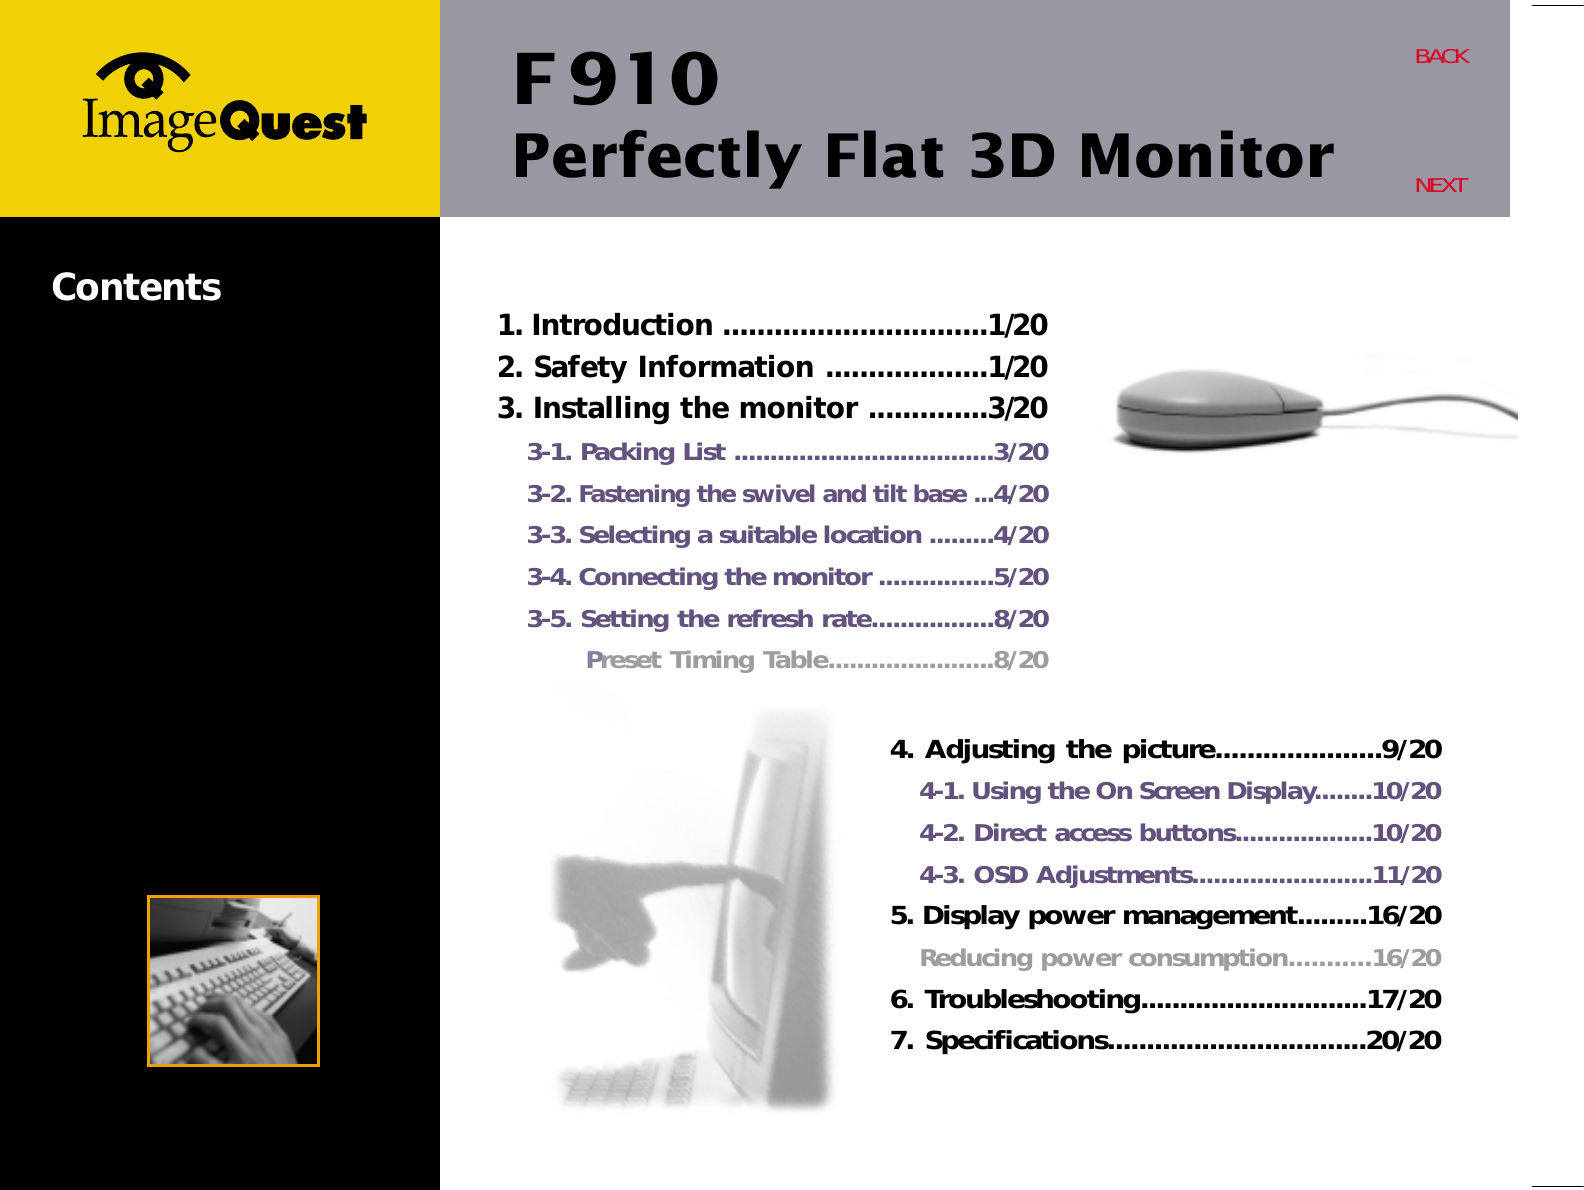 F 910Perfectly Flat 3D MonitorBACKNEXTContents 1. Introduction ...............................1/202. Safety Information ...................1/203. Installing the monitor ..............3/203-1. Packing List ....................................3/203-2. Fastening the swivel and tilt base ...4/203-3. Selecting a suitable location .........4/203-4. Connecting the monitor ................5/203-5. Setting the refresh rate.................8/20Preset Timing Table.......................8/204. Adjusting the picture.....................9/204-1. Using the On Screen Display........10/204-2. Direct access buttons...................10/204-3. OSD Adjustments.........................11/205. Display power management.........16/20Reducing power consumption...........16/206. Troubleshooting.............................17/207. Specifications.................................20/20